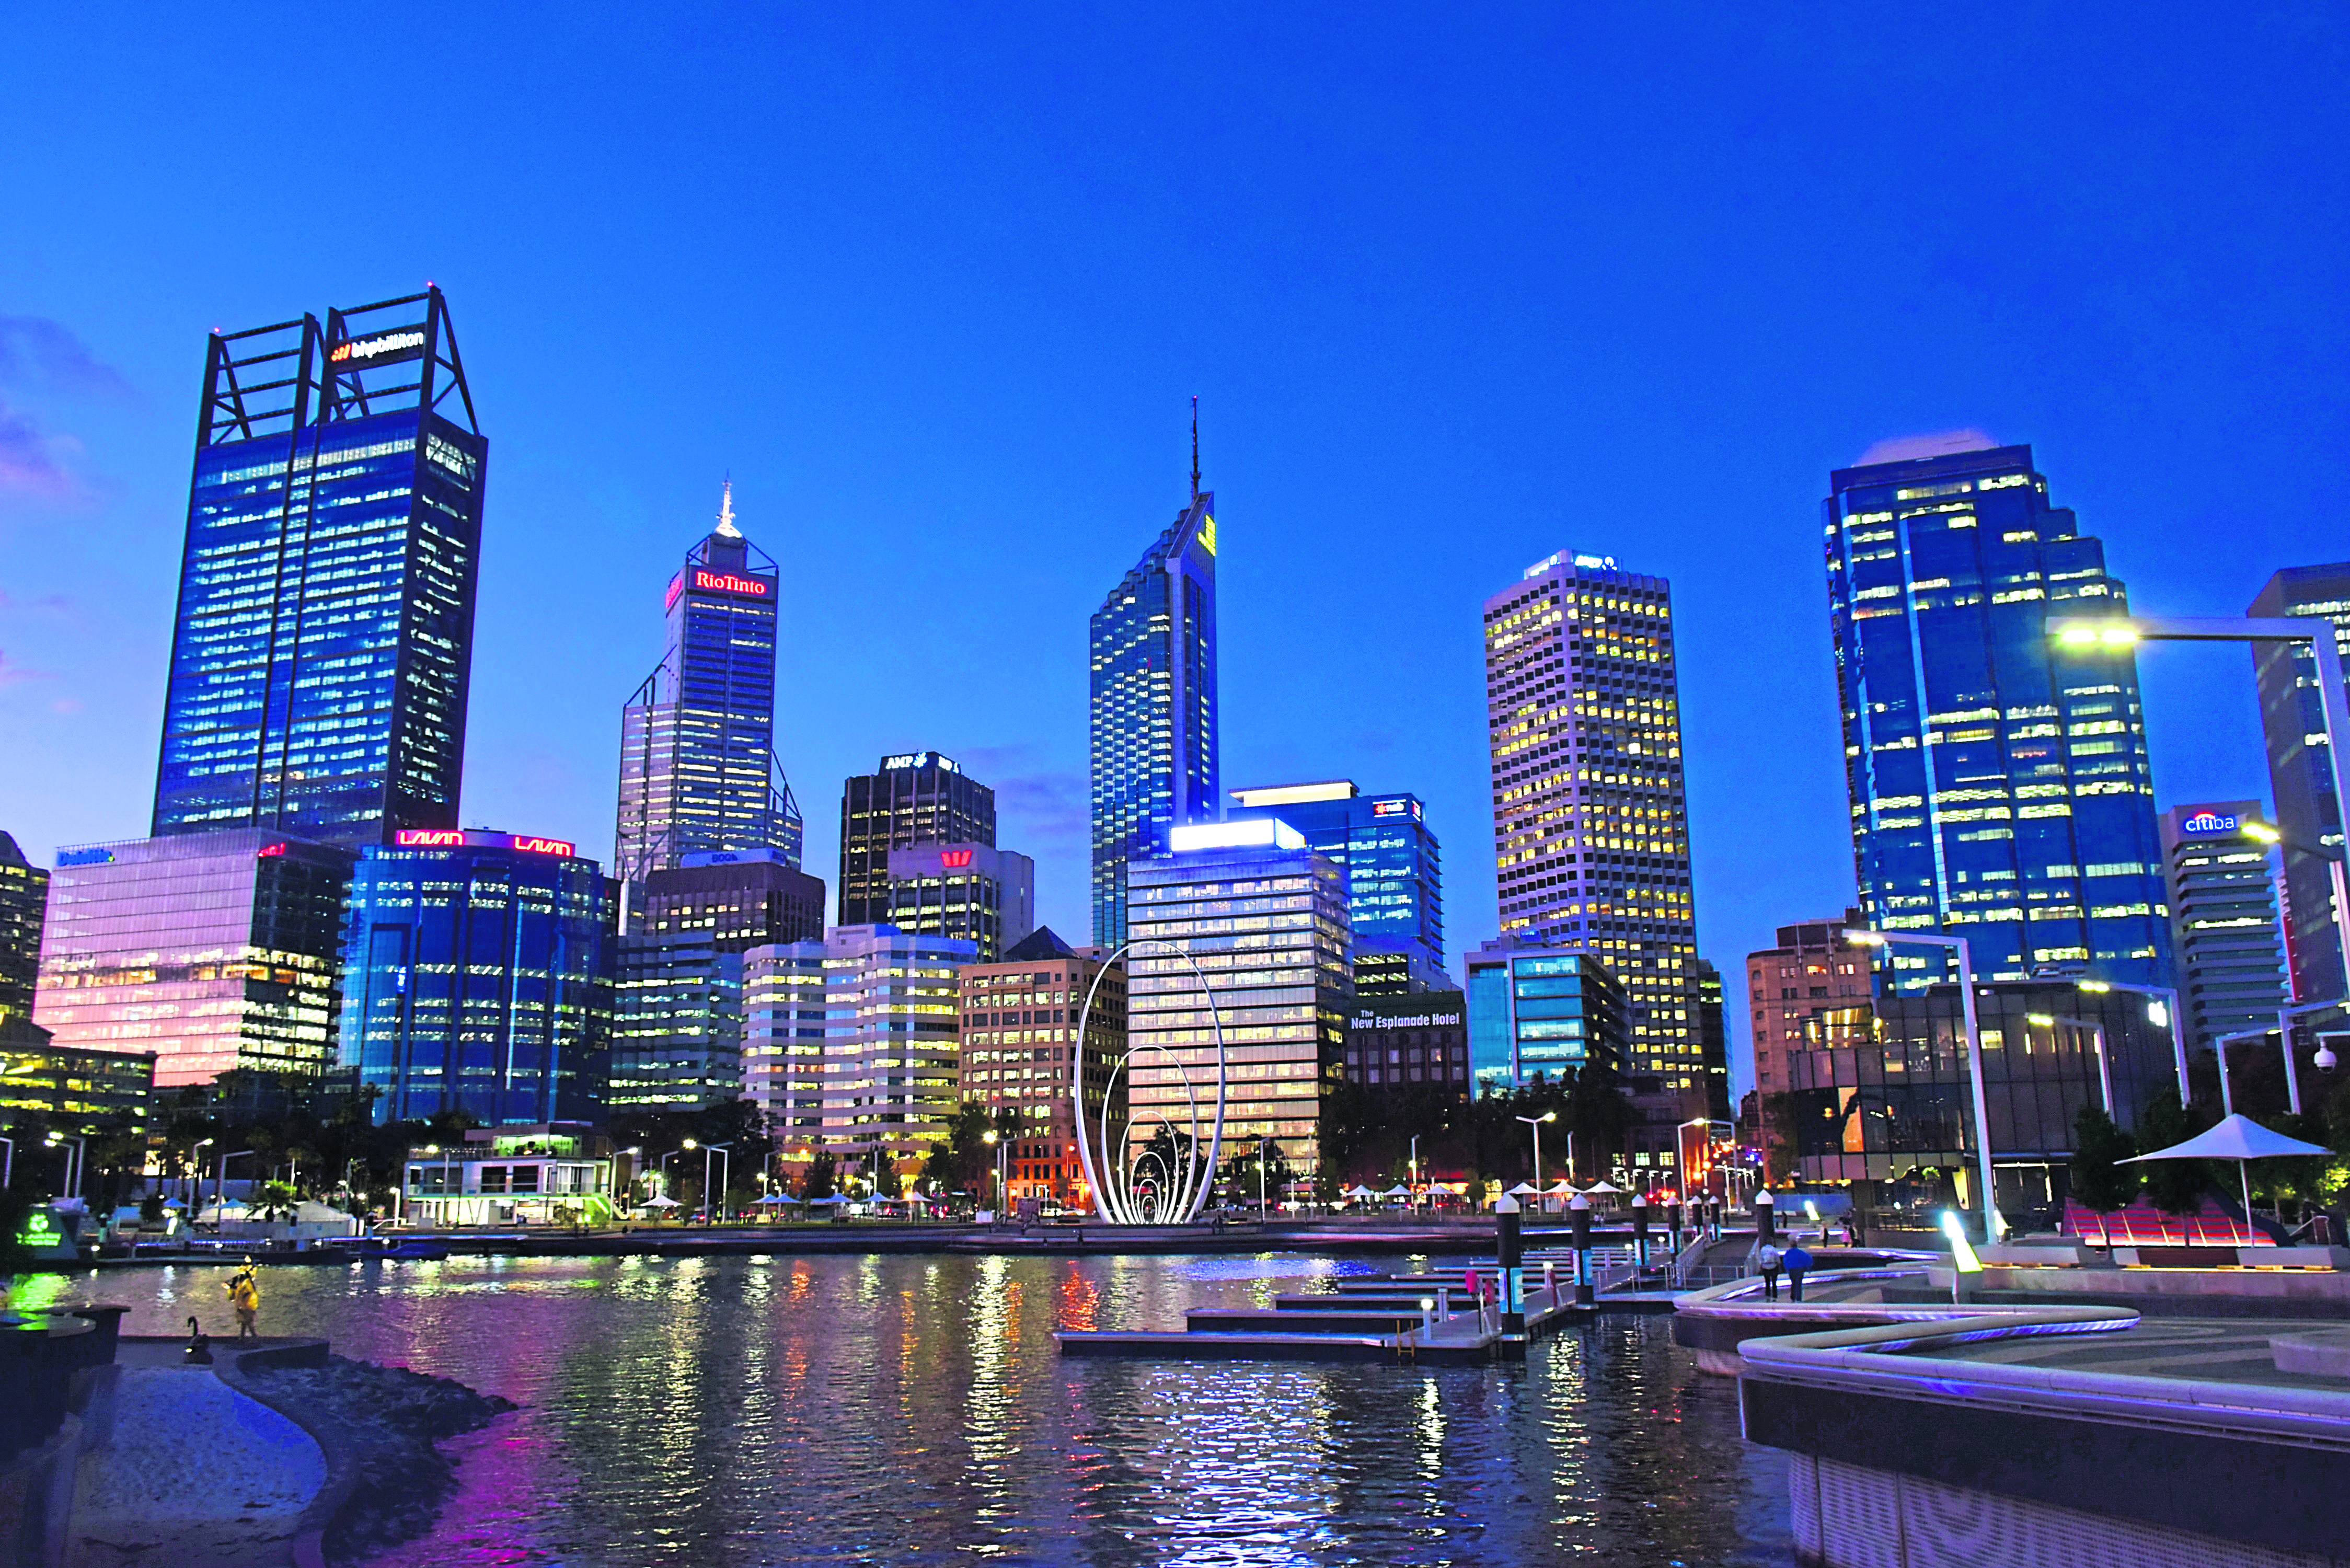 Perth is the capital and largest city of the state of Western Australia